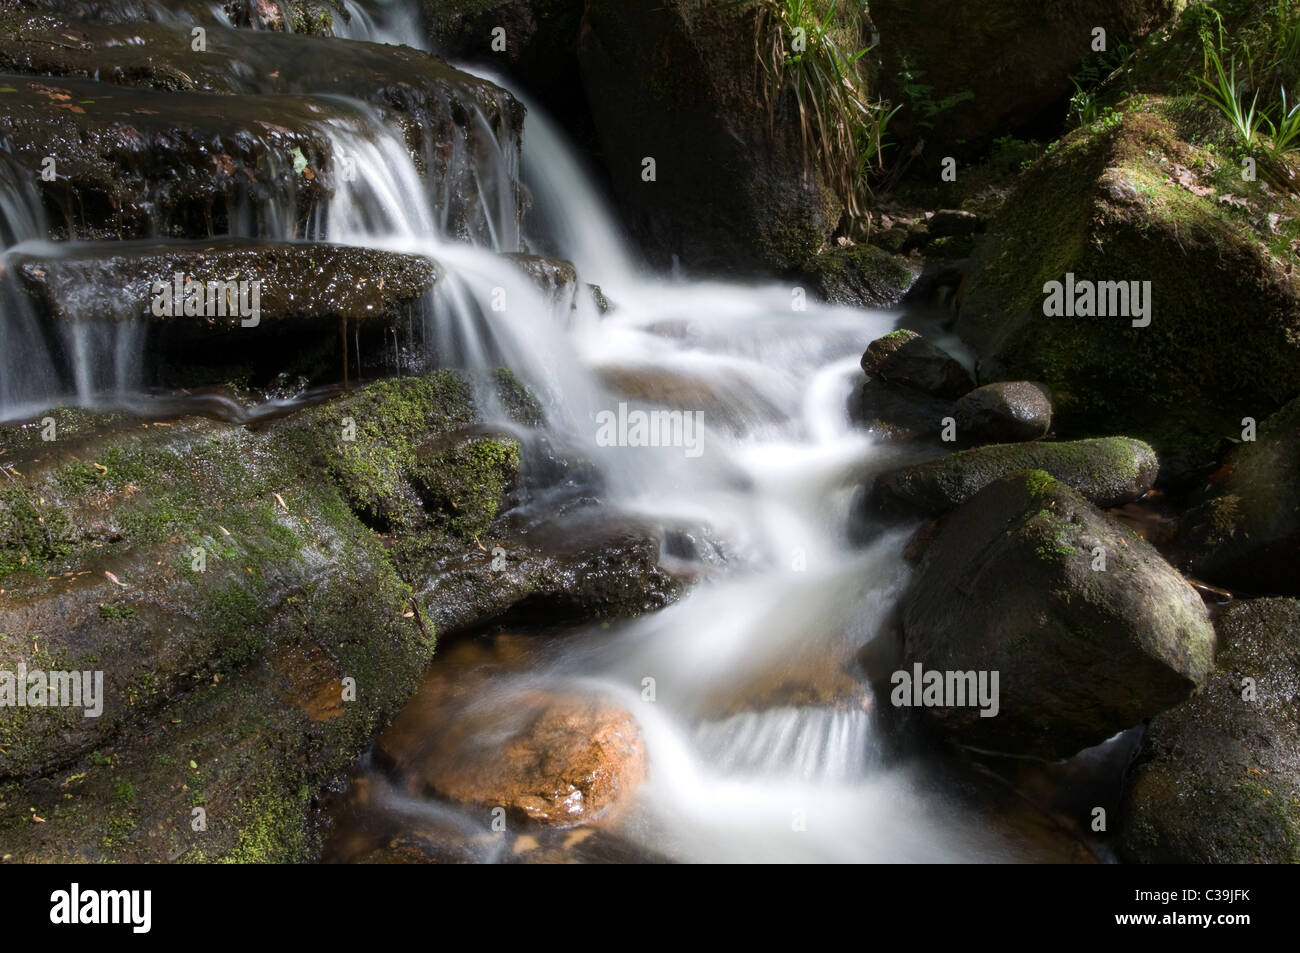 Stream running through Padley Gorge on the Longshaw Estate in the Peak District over Rocks Stock Photo